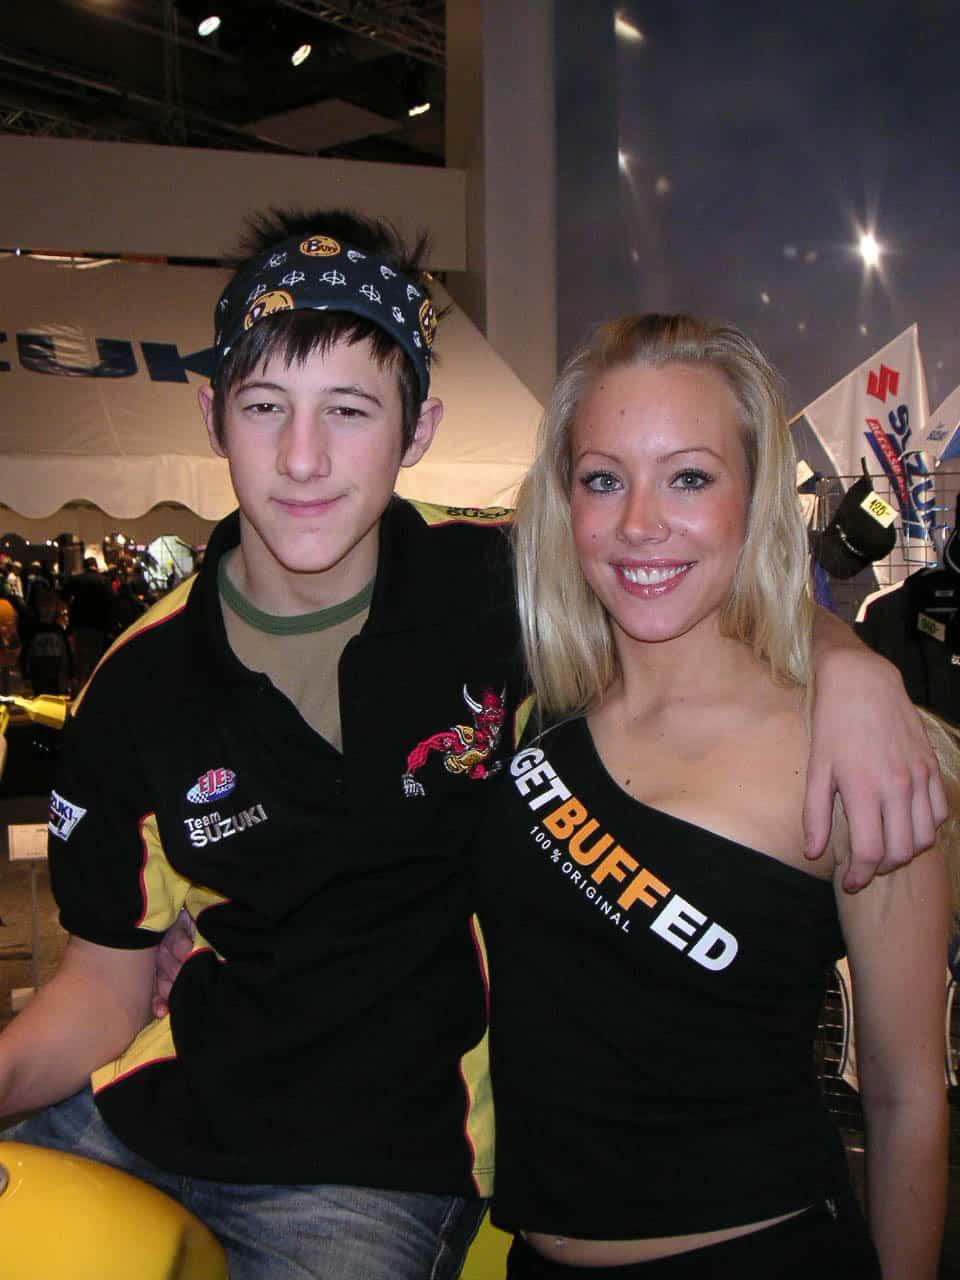 A portrait frontal upper body photo of a you man and woman on a motorcycle trade show. The man on the left is sitting on a motorbike and the woman is standing to the right. The woman seems to be a promo girl for Buff® and the man seems to be a Suzuki team rider. He is wearing a Original Buff® as head band in a very stylish, expressive way. Source: buff.eu Copyright: Distributed for the promotion of Original Buff® in motorcycling